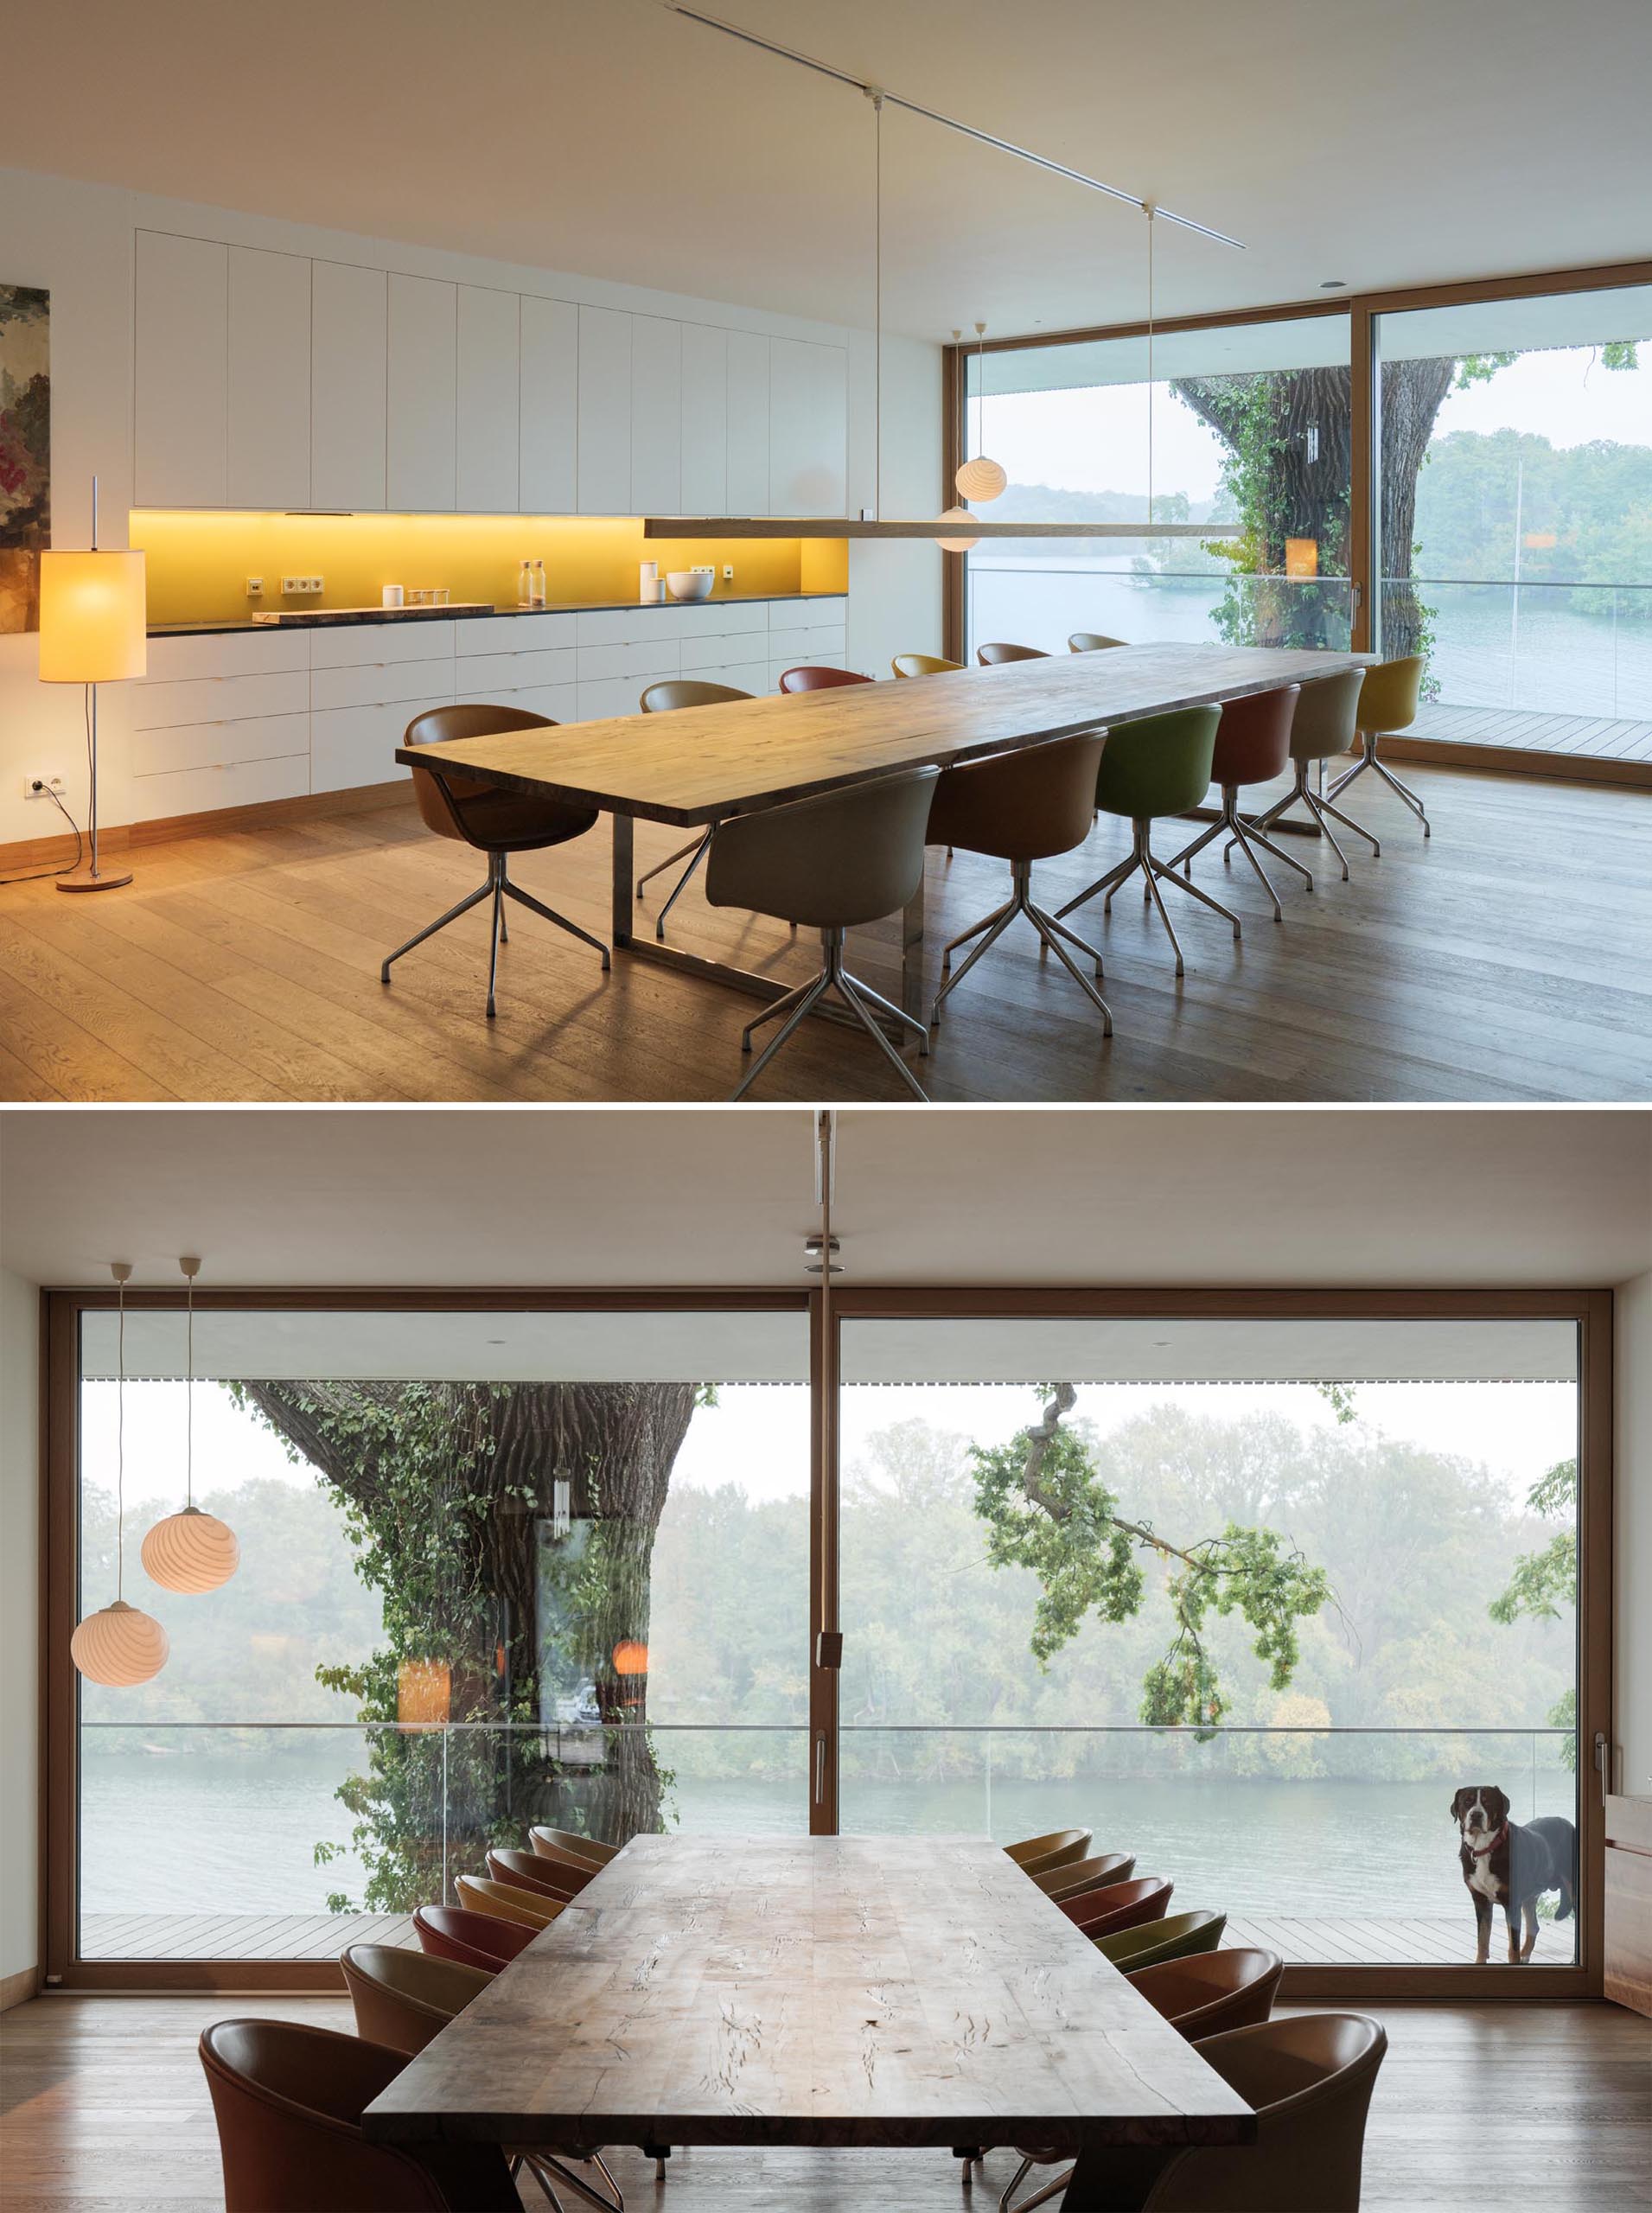 A modern dining room with an oversized wood table, matching minimalist pendant light, and colorful artwork.